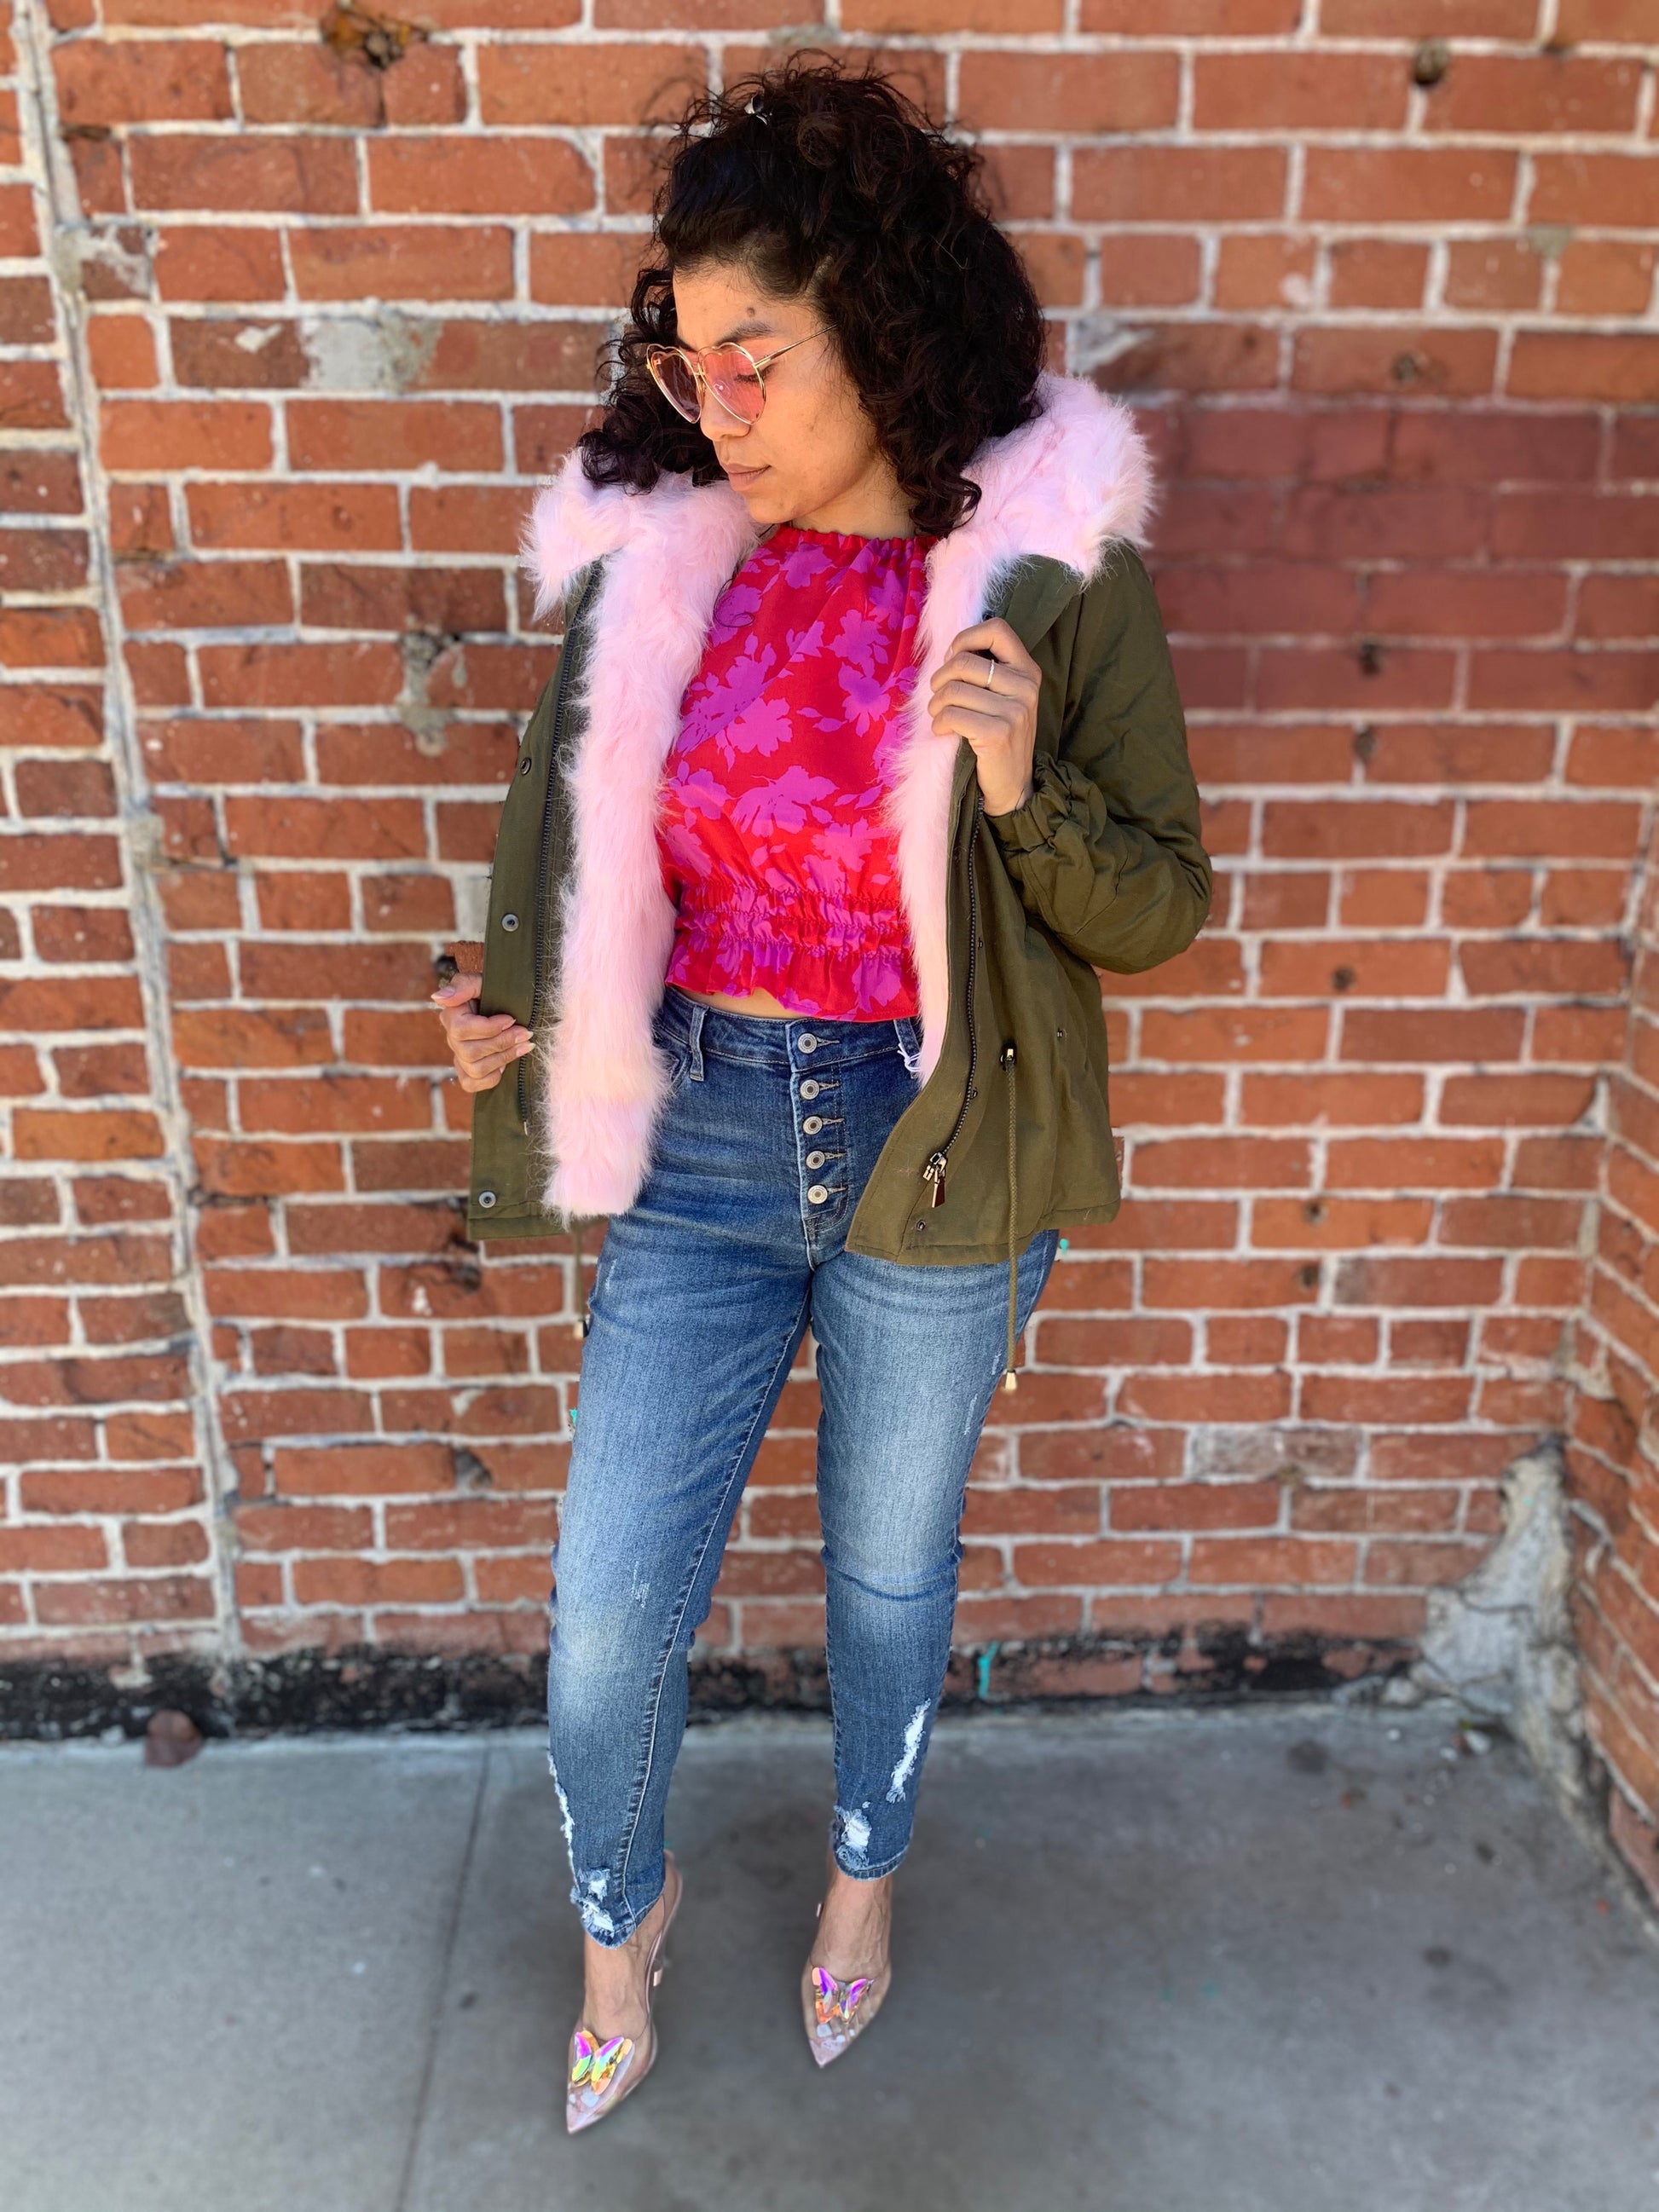 model wearing an olive cargo jacket lined with pink faux fur. paired with skinny Demin jeans, a magenta floral blouse and butterfly high heels.